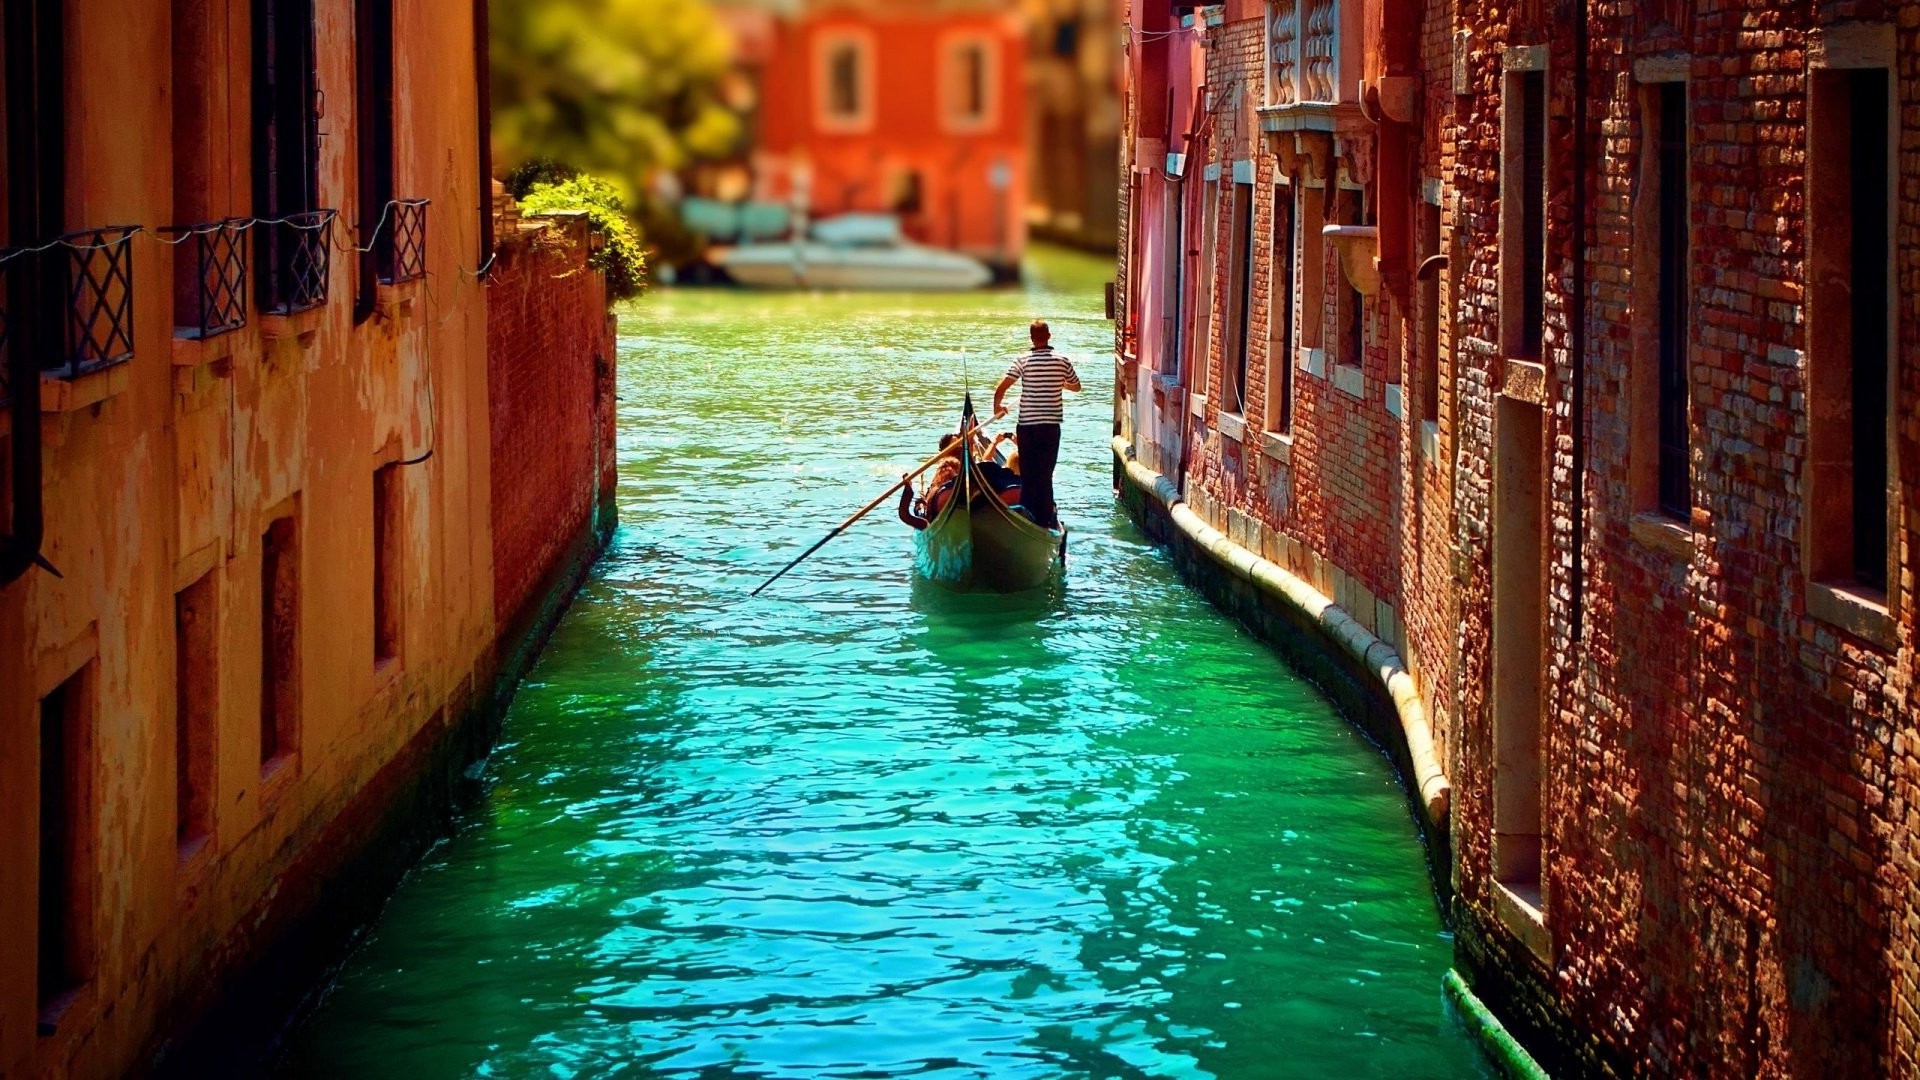 city and architecture gondola canal venetian water gondolier travel boat architecture street river city lagoon old bridge outdoors traditional reflection building